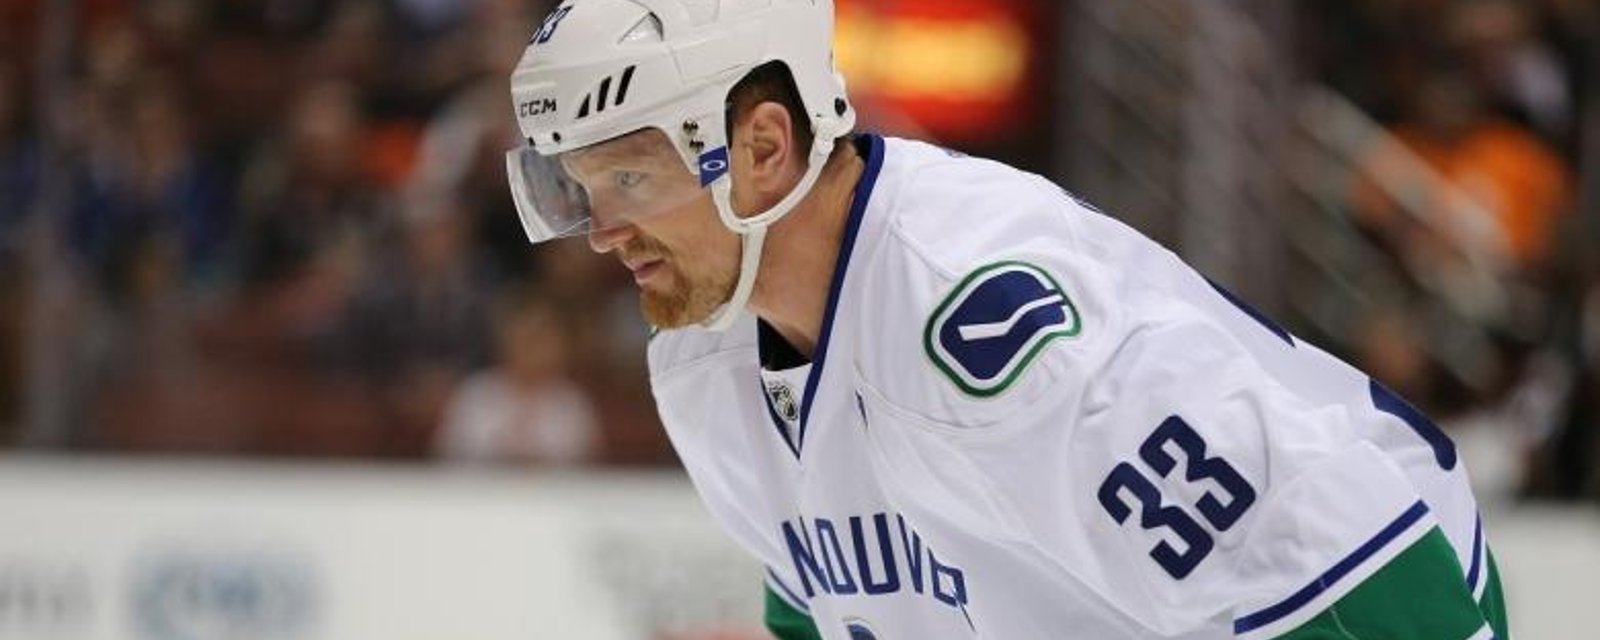 NHL has reportedly made a decision on discipline following hit on Henrik.